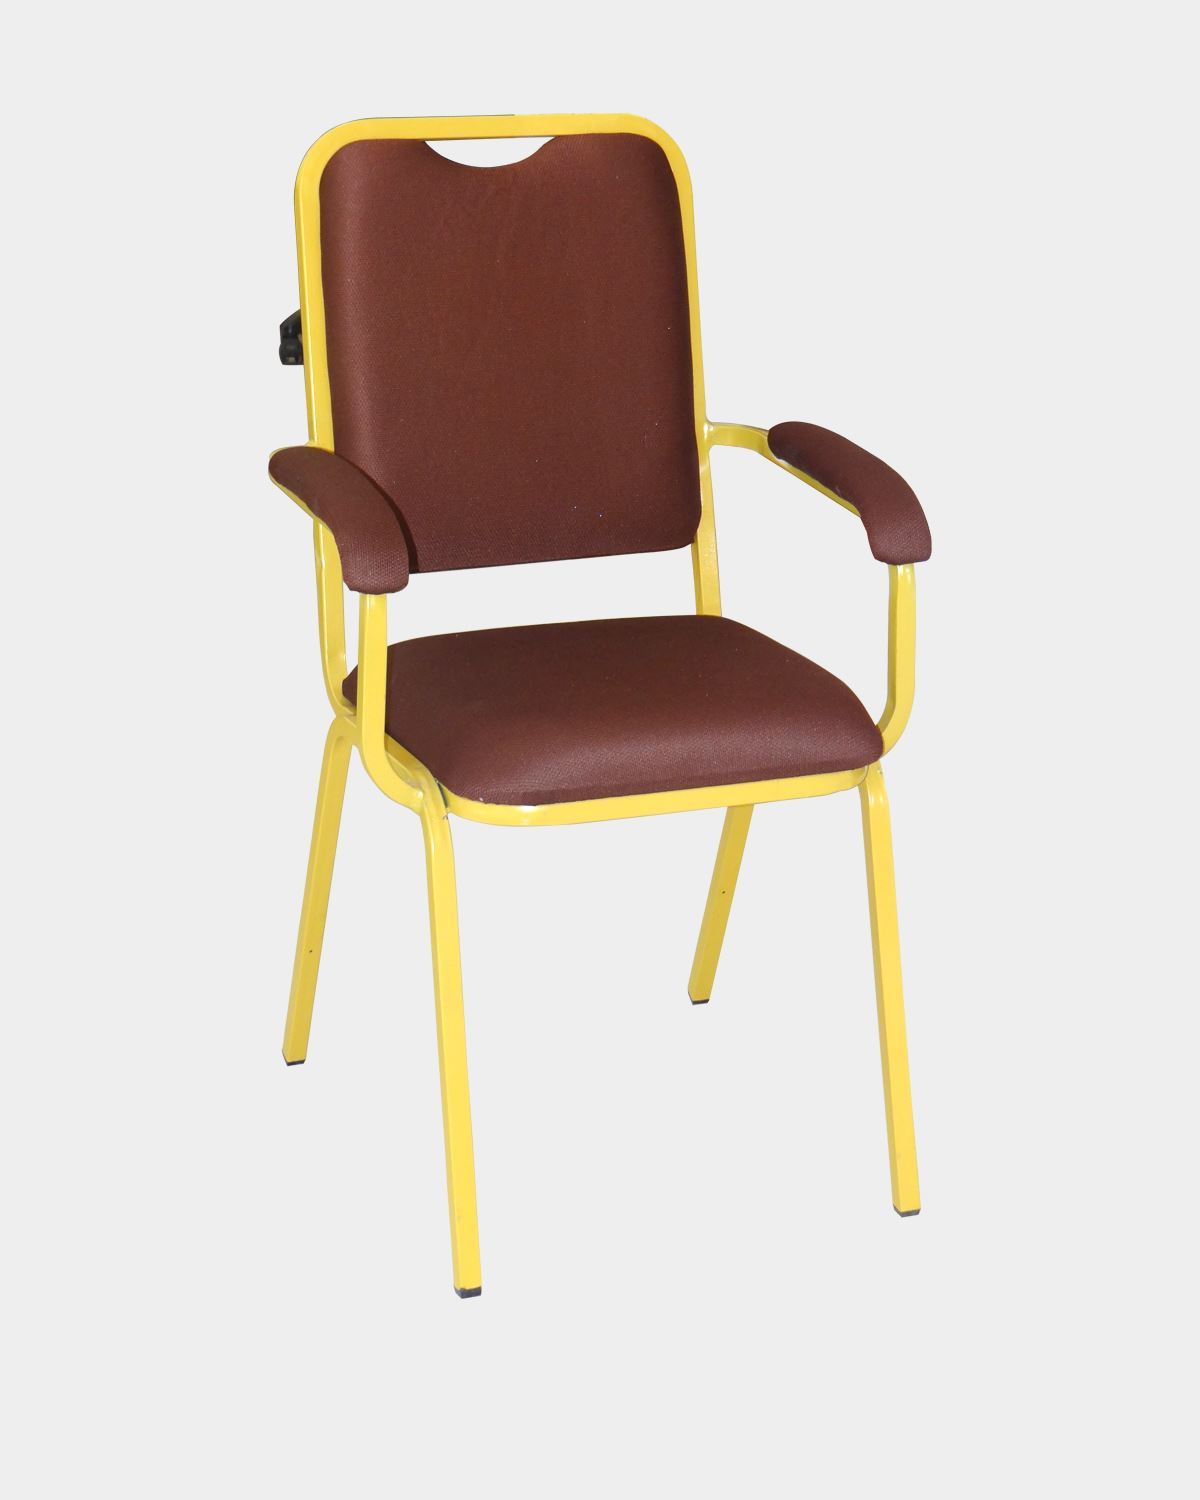 Banquet Chairs Stackable Chairs Online Furniture Shopping Site